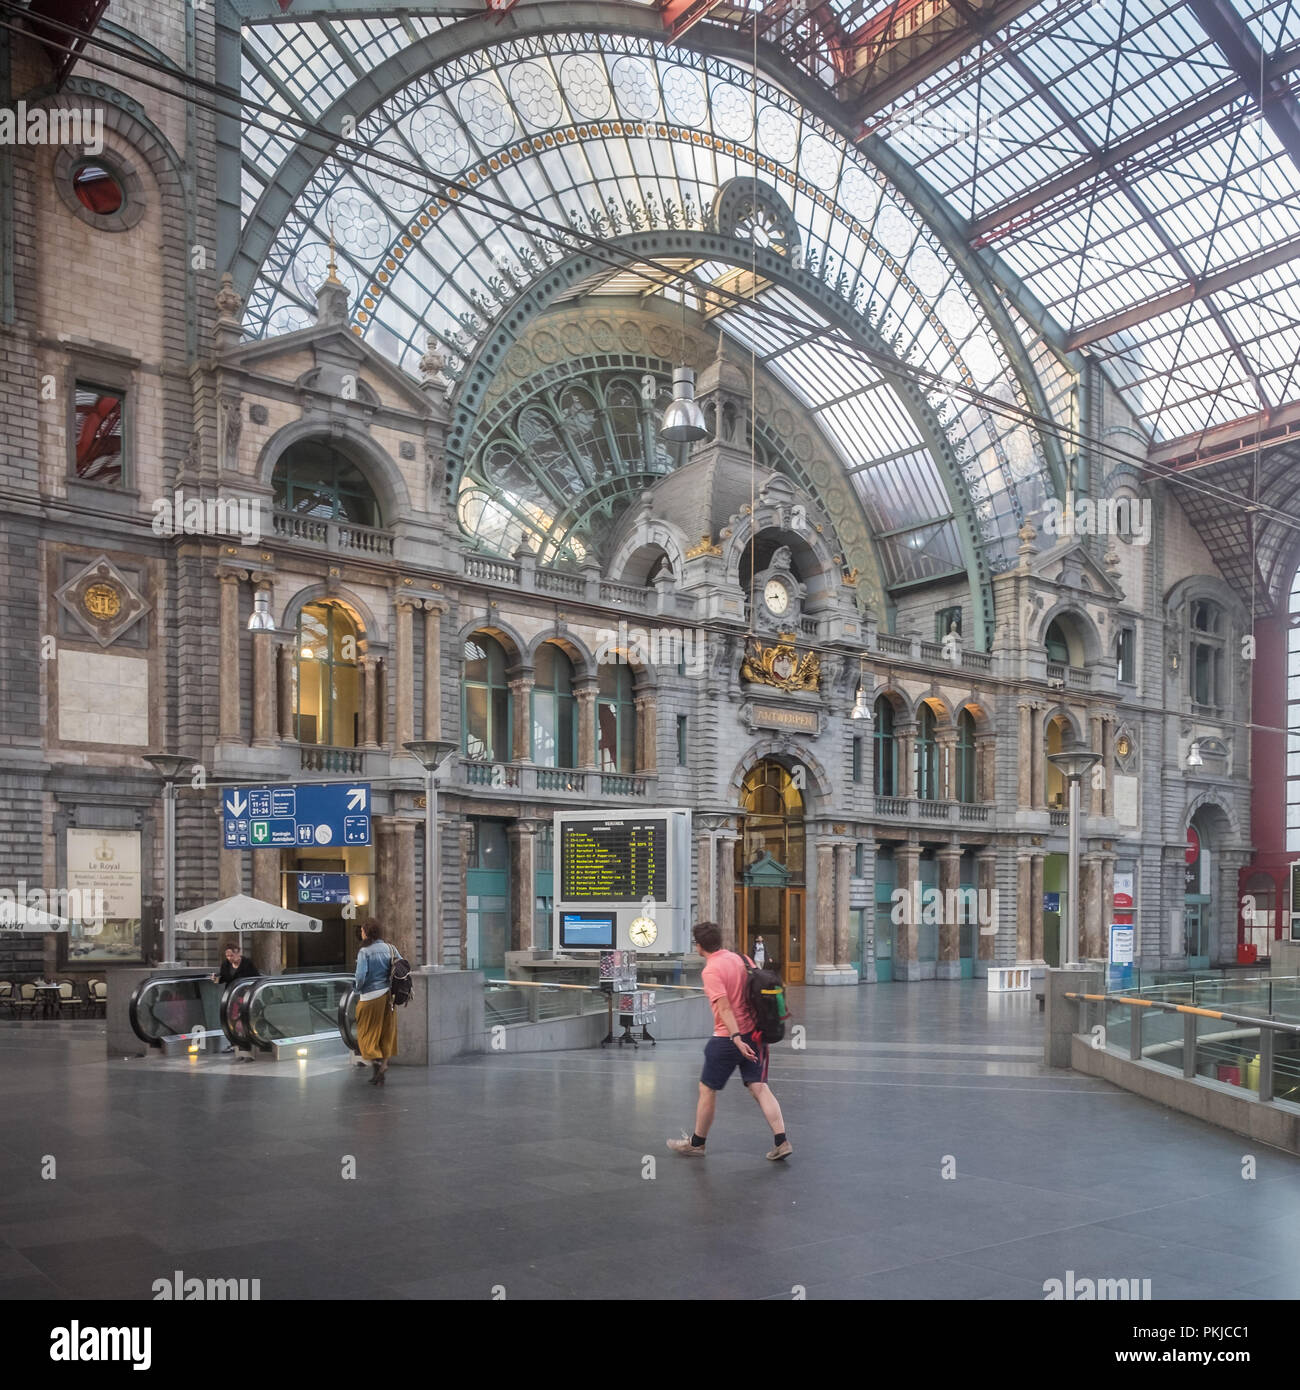 Tourists and commuters in the beautiful historic Antwerp Central Station, Wednesday 7 June 2017, Antwerp, Belgium. Stock Photo